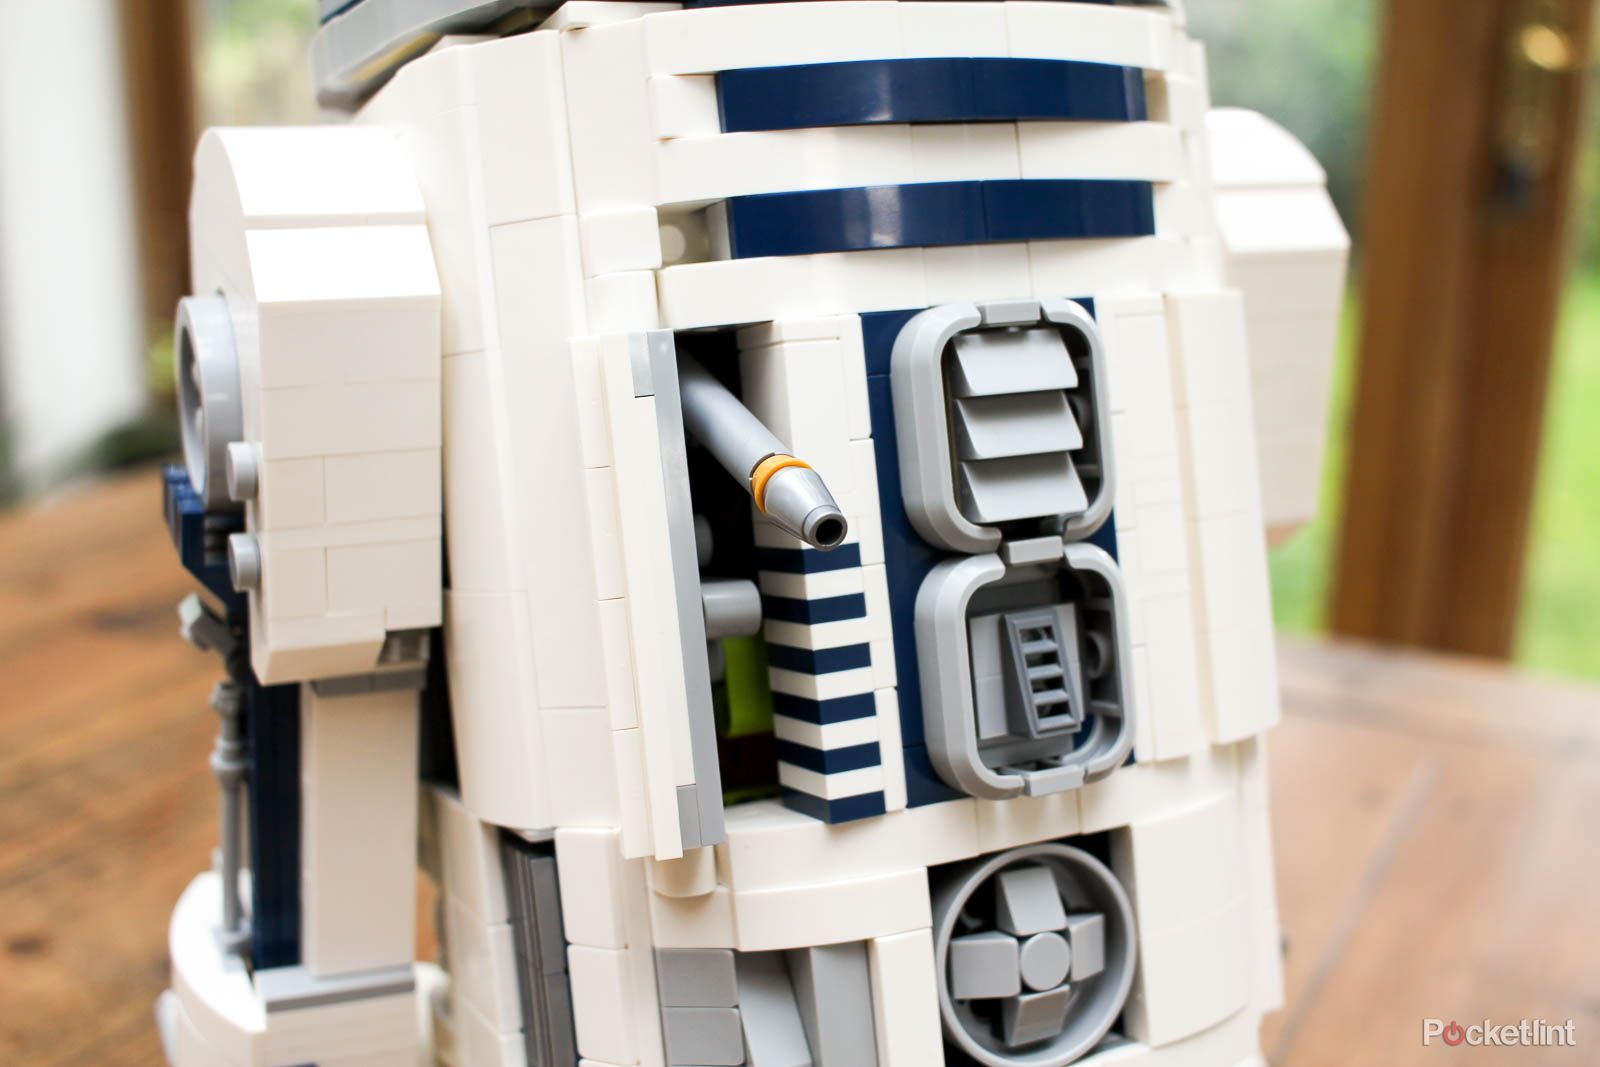 Lego R2-D2 hands on build pictures photo 9